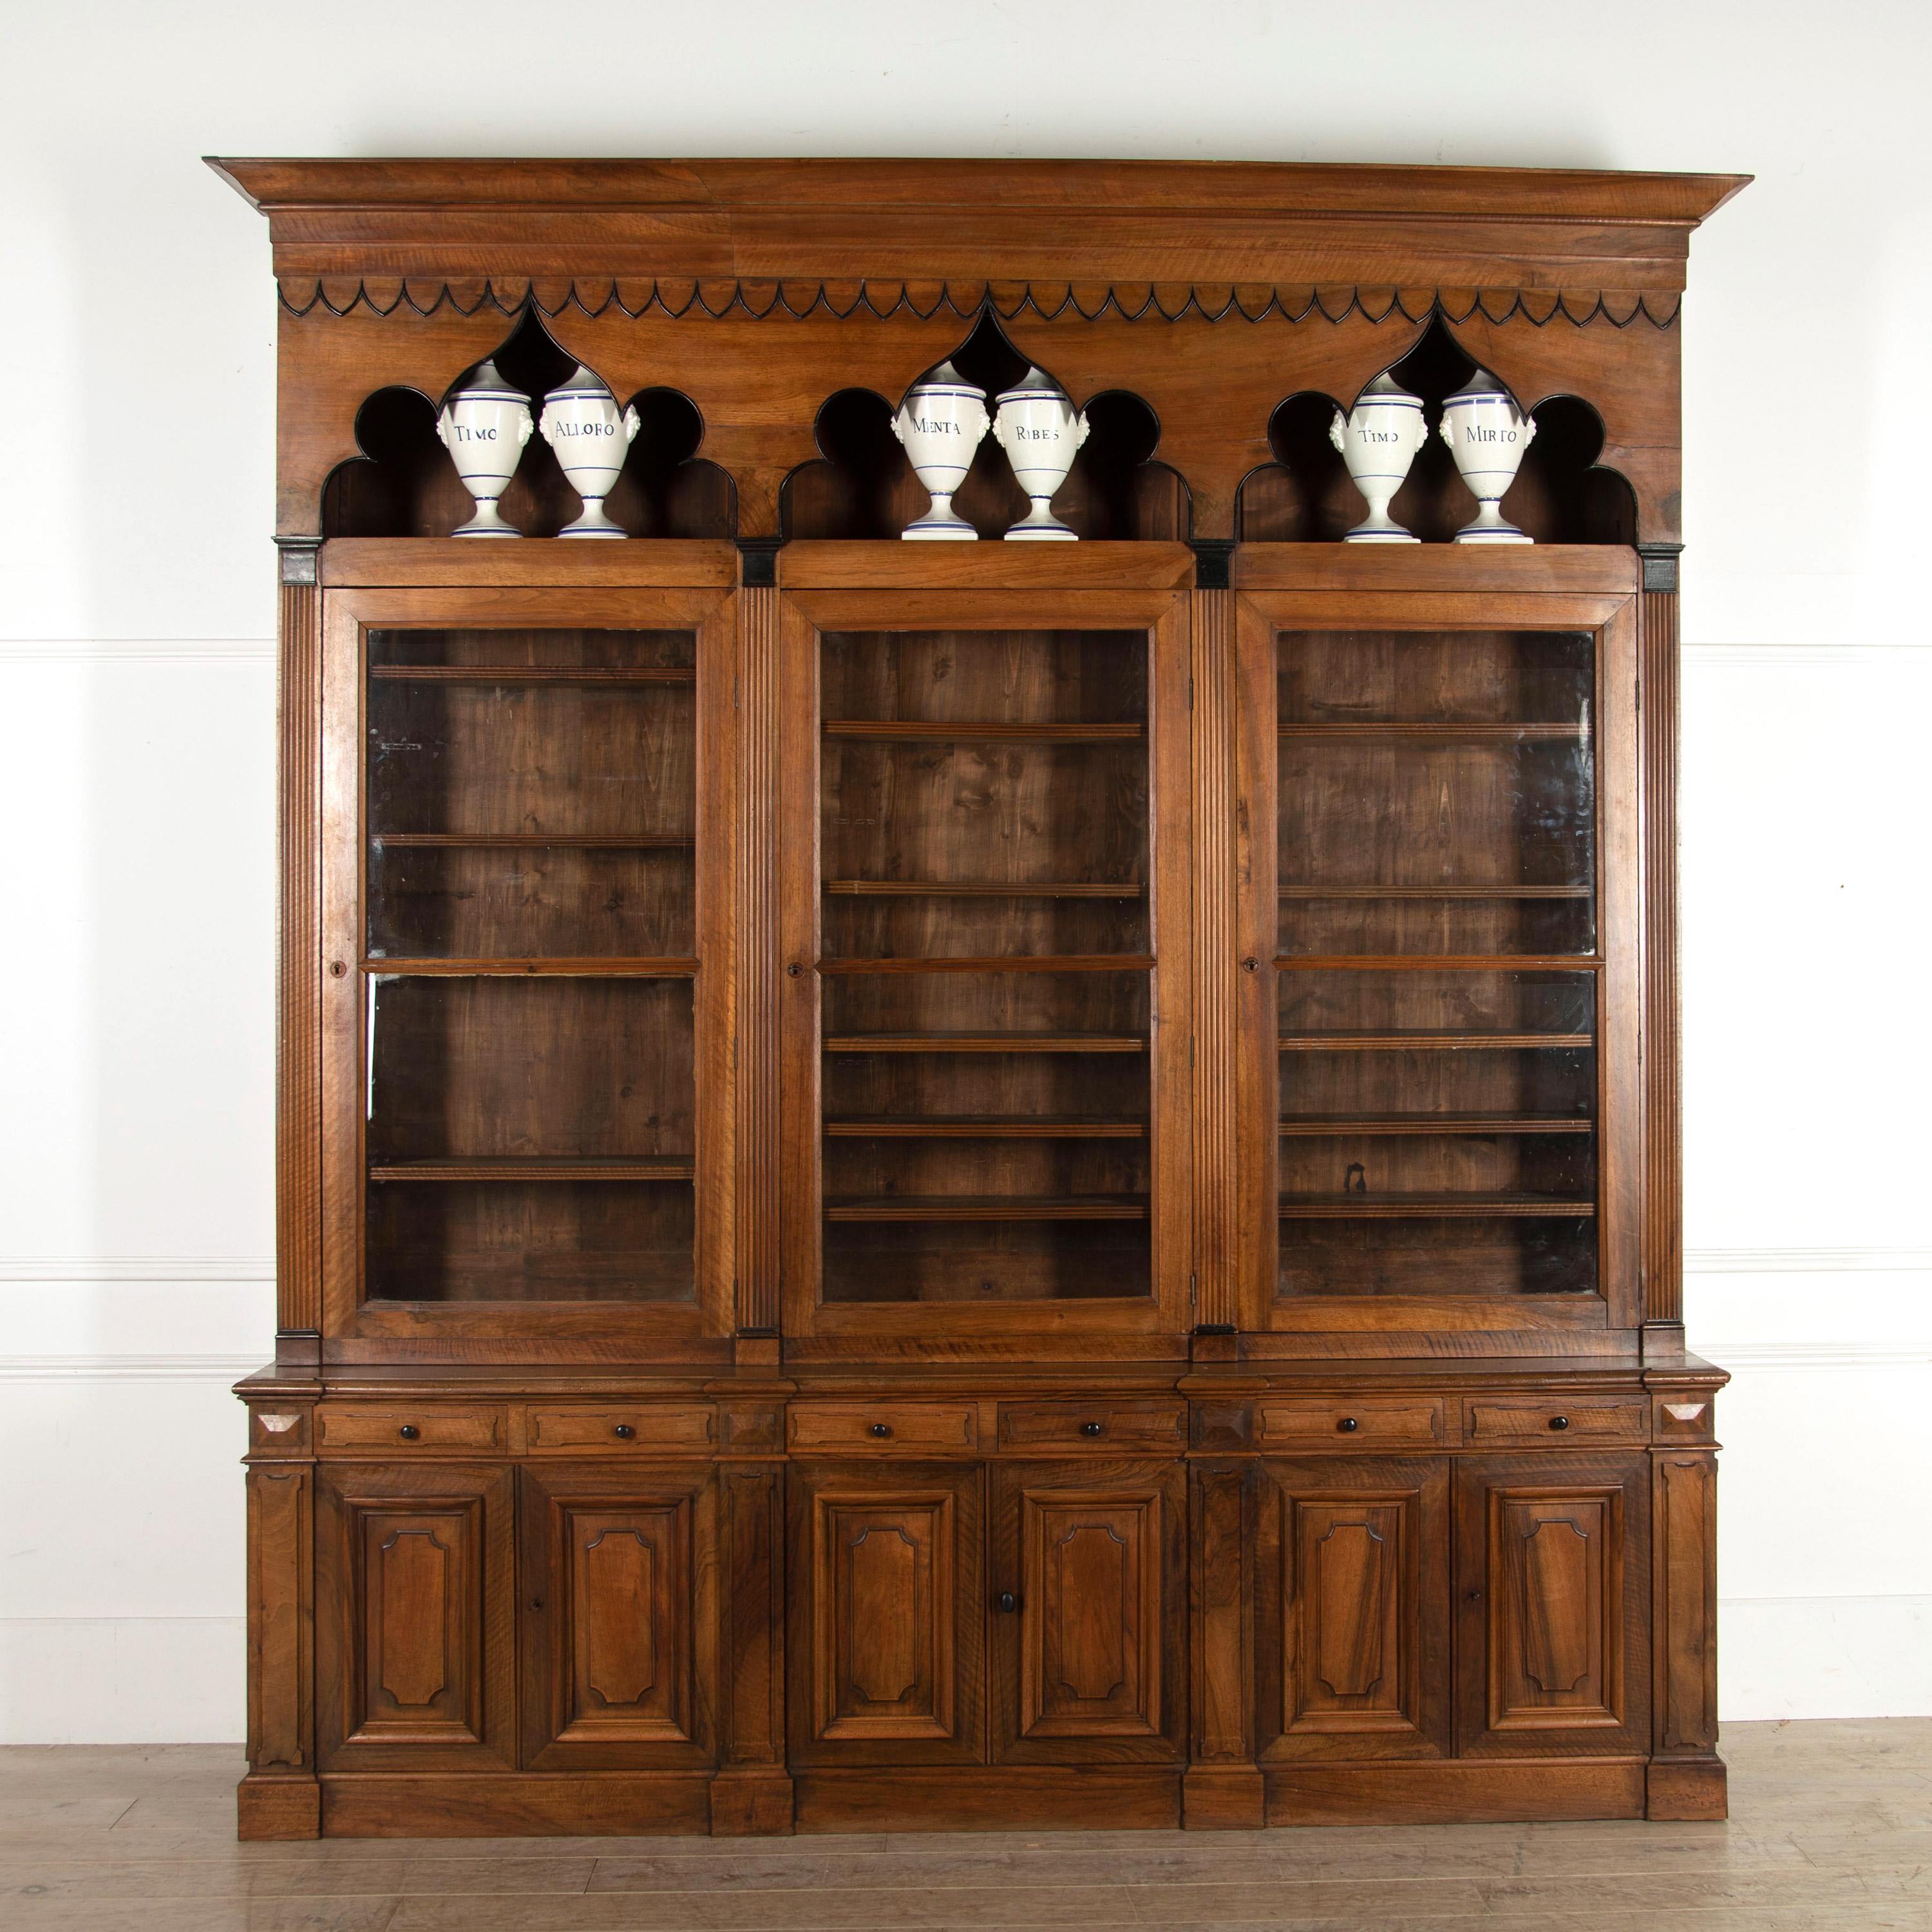 18th century solid walnut gothic style bookcase, stunning example of French craftsmanship. From a Lyon Doctors Hôtel Particulier. Three doors glazed with the original antique glass, and carved bullnose shelving, sits upon the elegant enfilade base